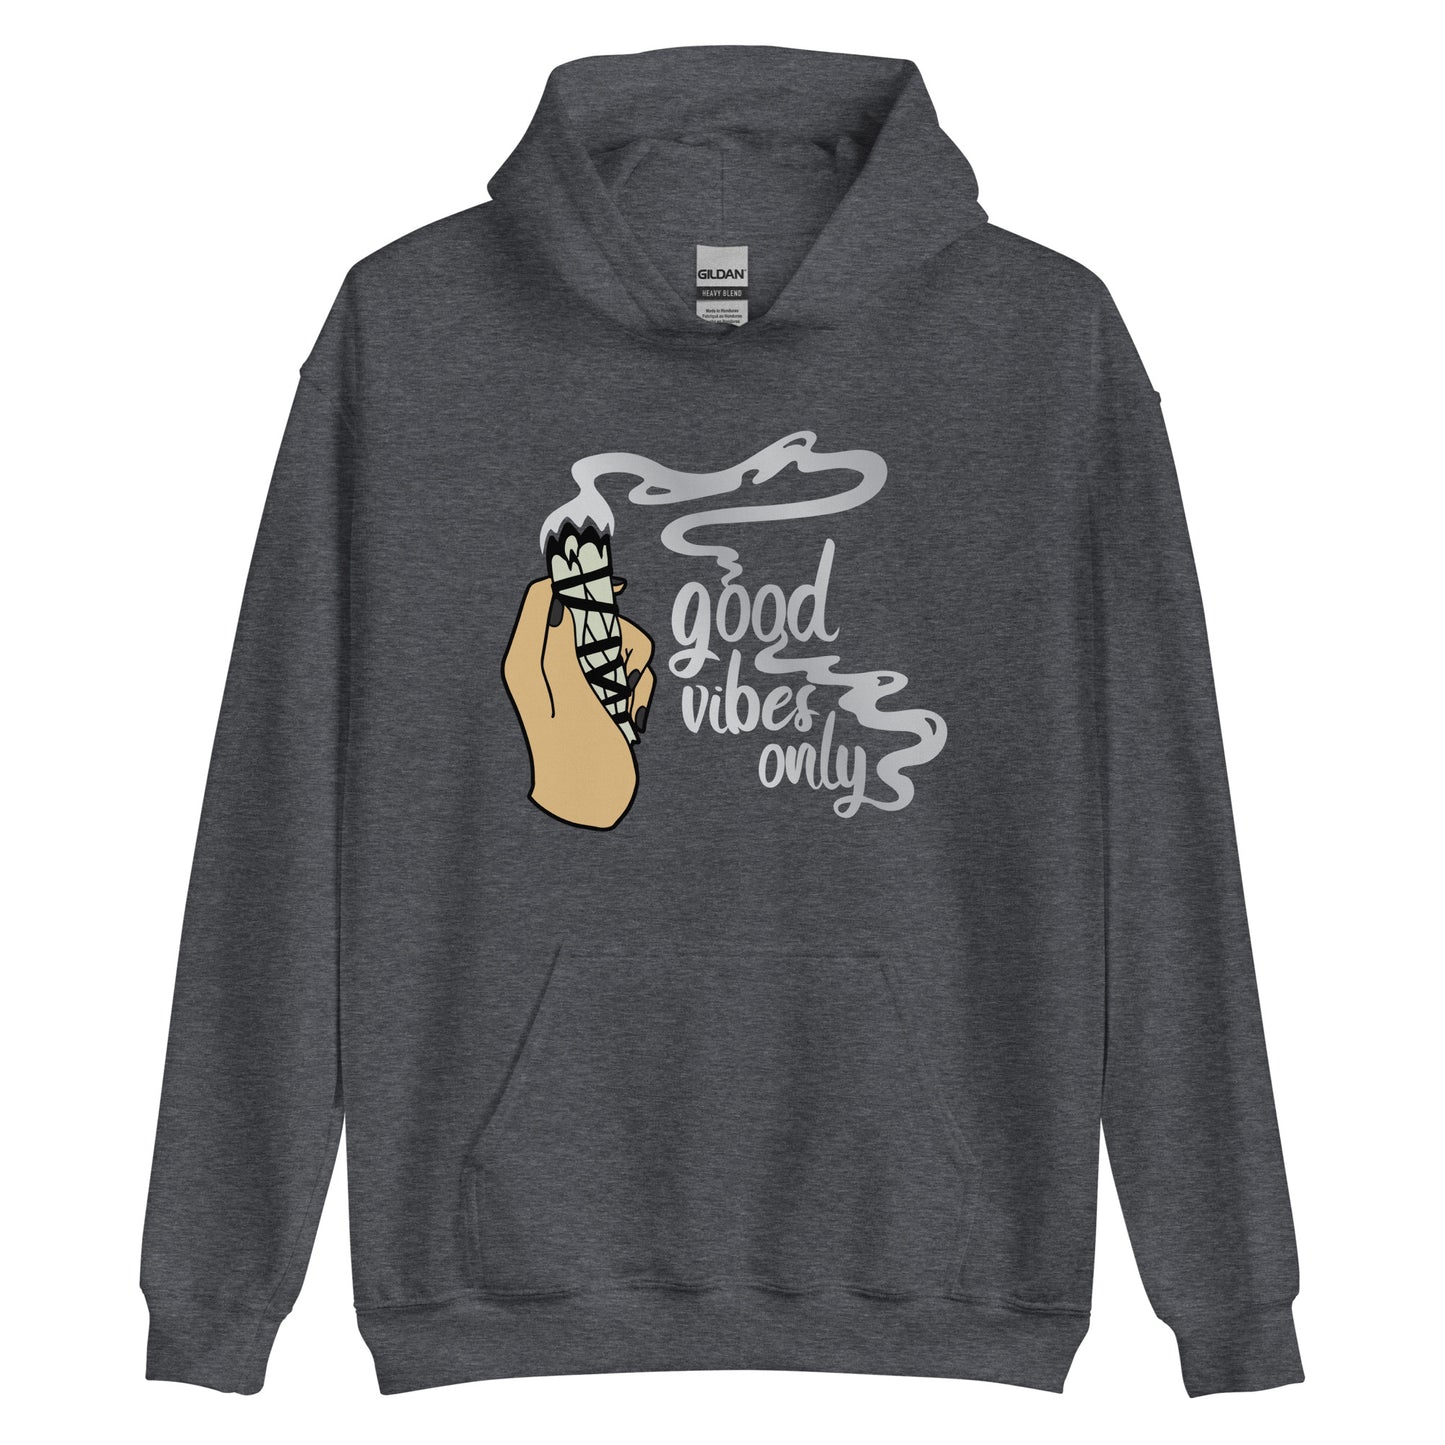 A dark grey hooded sweatshirt with graphic of a hand holding sage smudge stick and text reading "Good Vibes only"